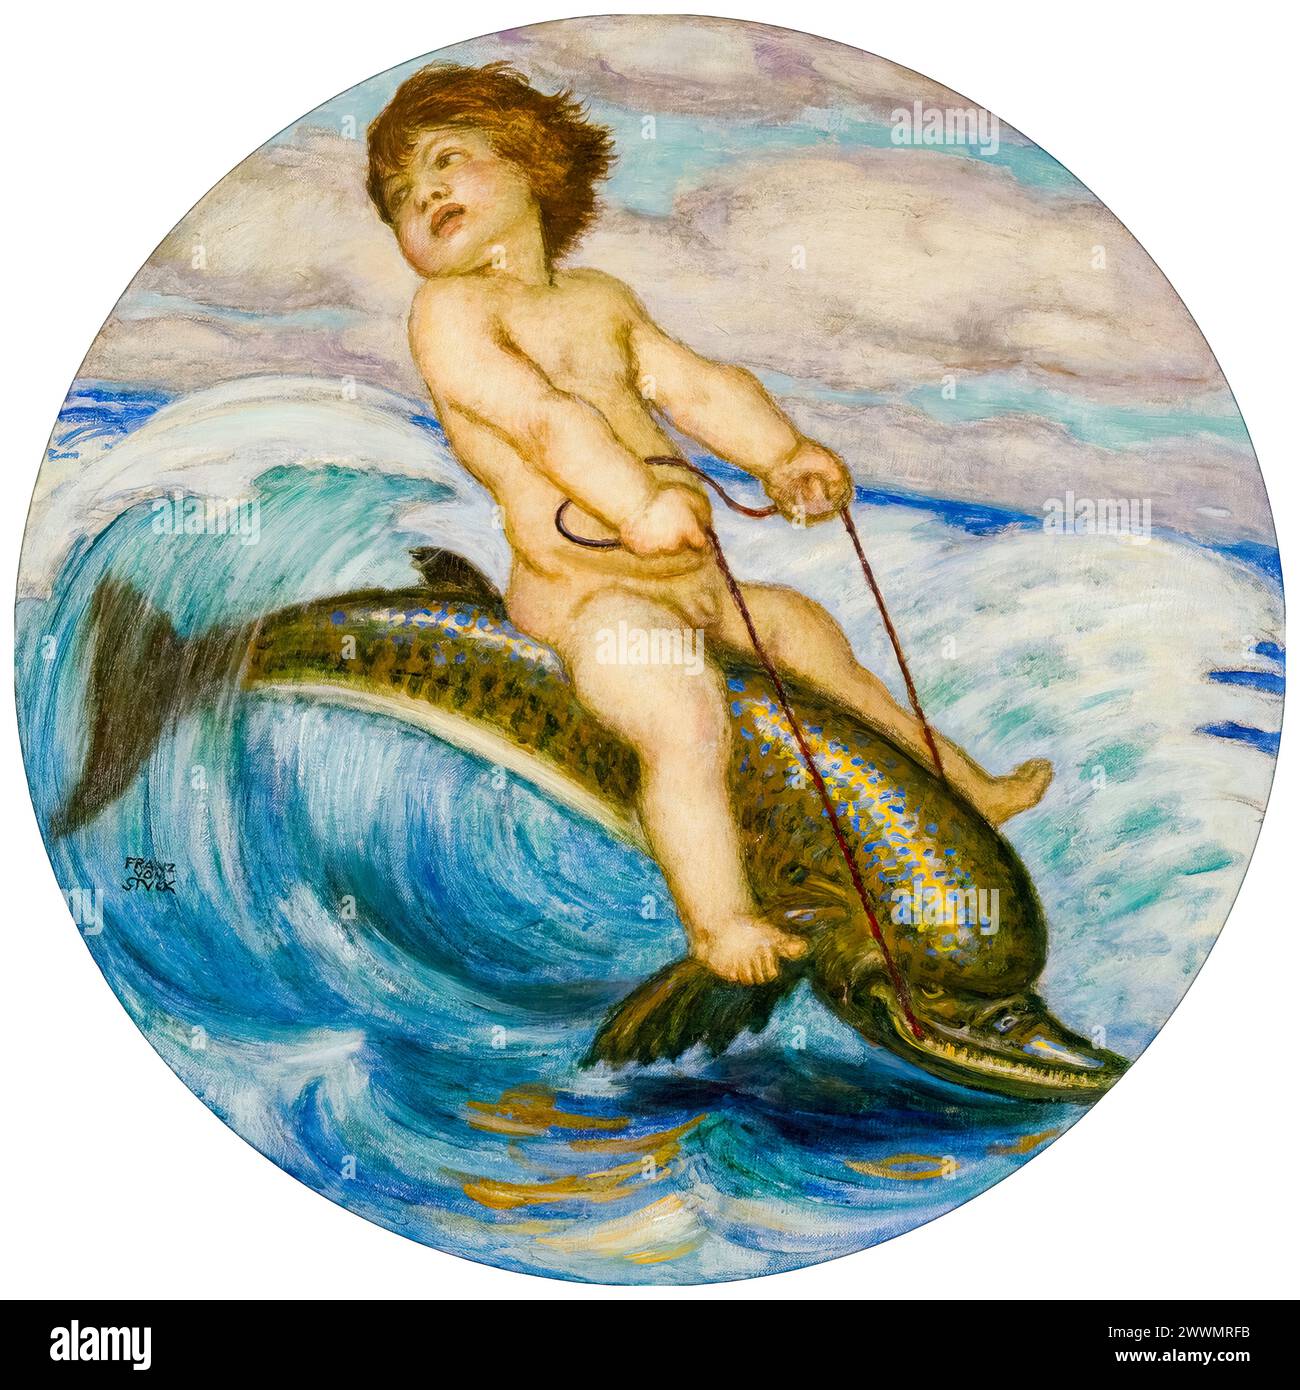 Franz von Stuck, Erote riding a dolphin, painting in tempera on canvas mounted on wood, circa 1912 Stock Photo